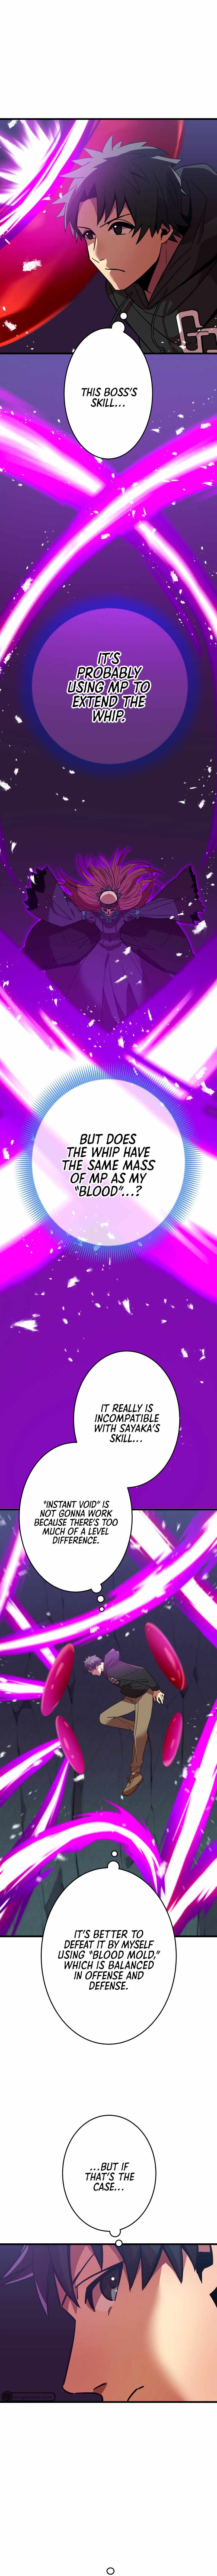 Savior of Divine Blood ~Draw Out 0.00000001% To Become the Strongest~ chapter 10 page 3